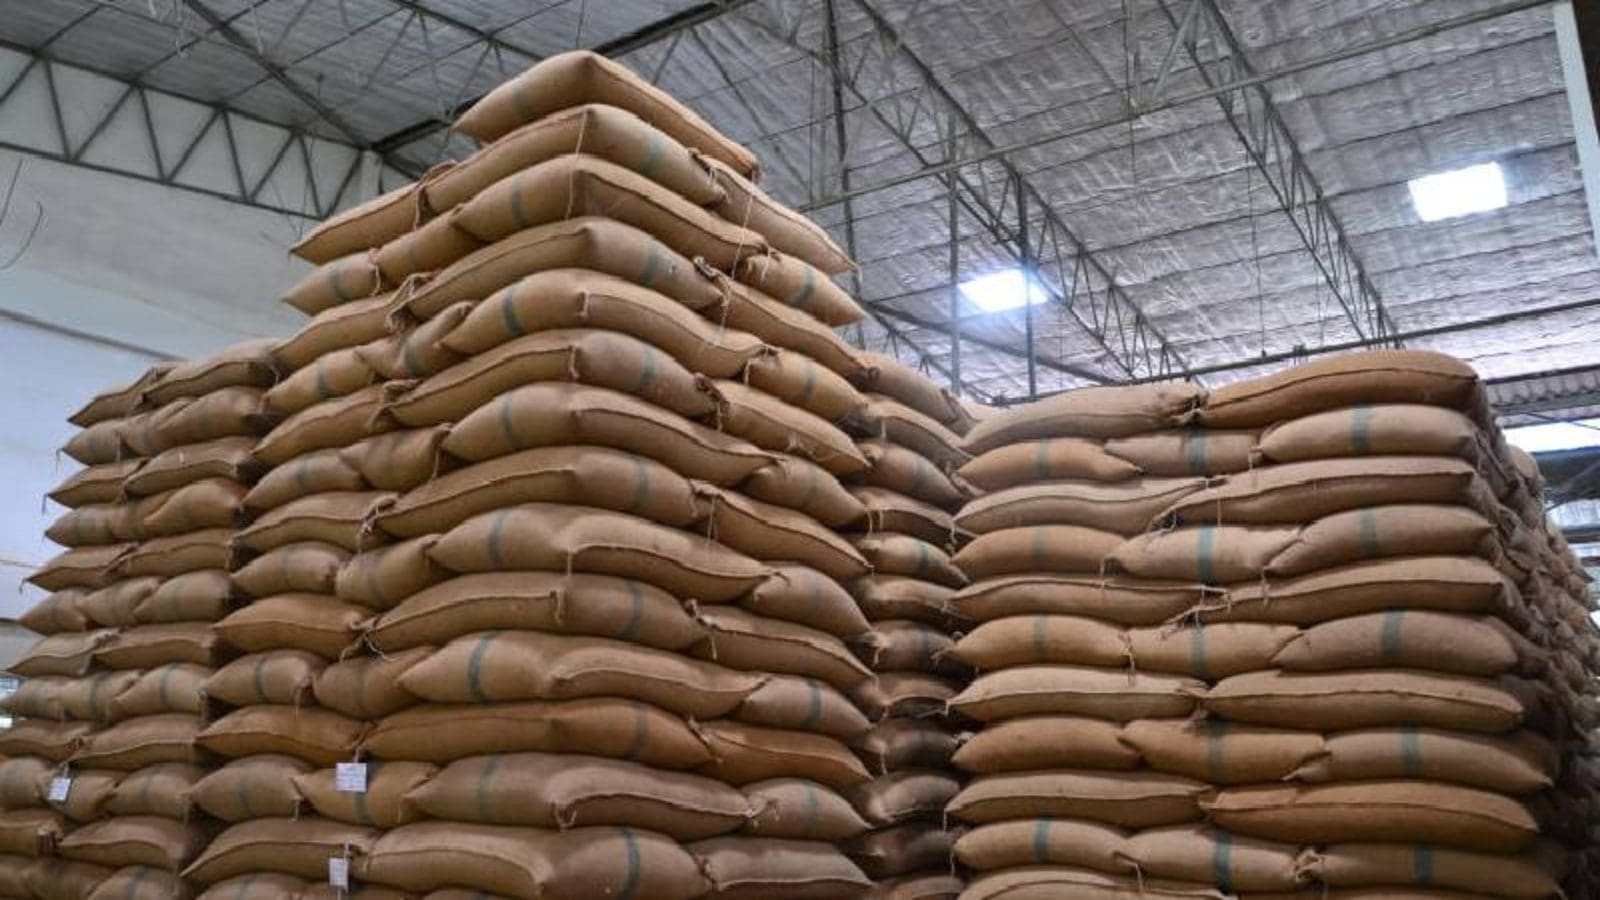 Kenya partners IFC to unveil US$ 2.7M warehouse receipt system aimed at reducing post-harvest losses